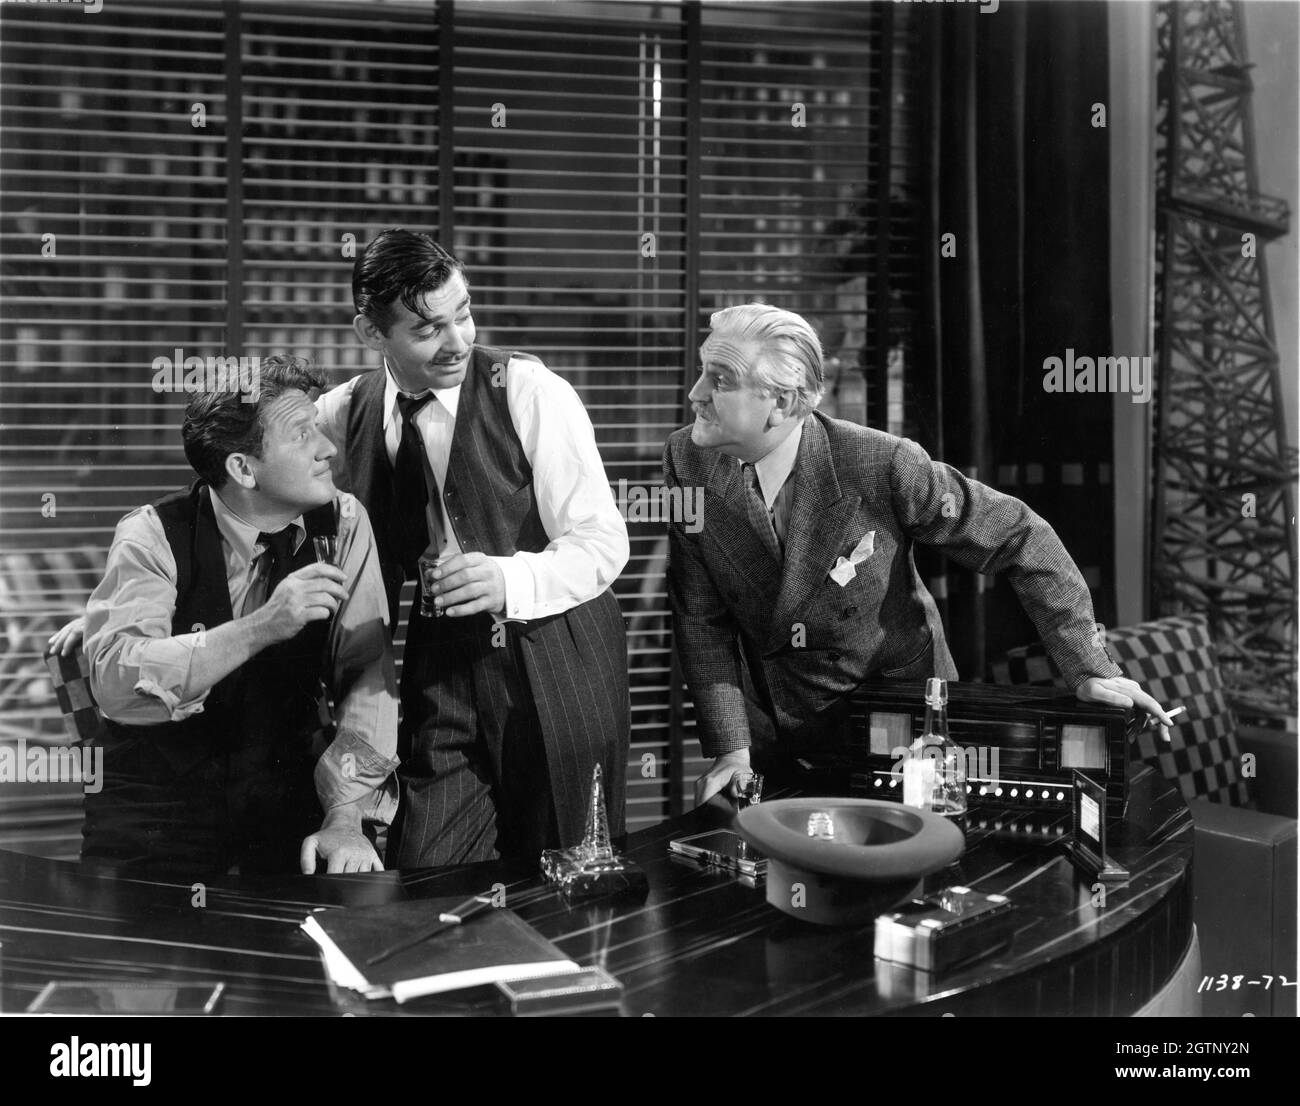 SPENCER TRACY CLARK GABLE and FRANK MORGAN in BOOM TOWN 1940 director JACK CONWAY screenplay John Lee Mahin based on a story by James Edward Grant gowns Gilbert Adrian music Franz Waxman Metro Goldwyn Mayer Stock Photo